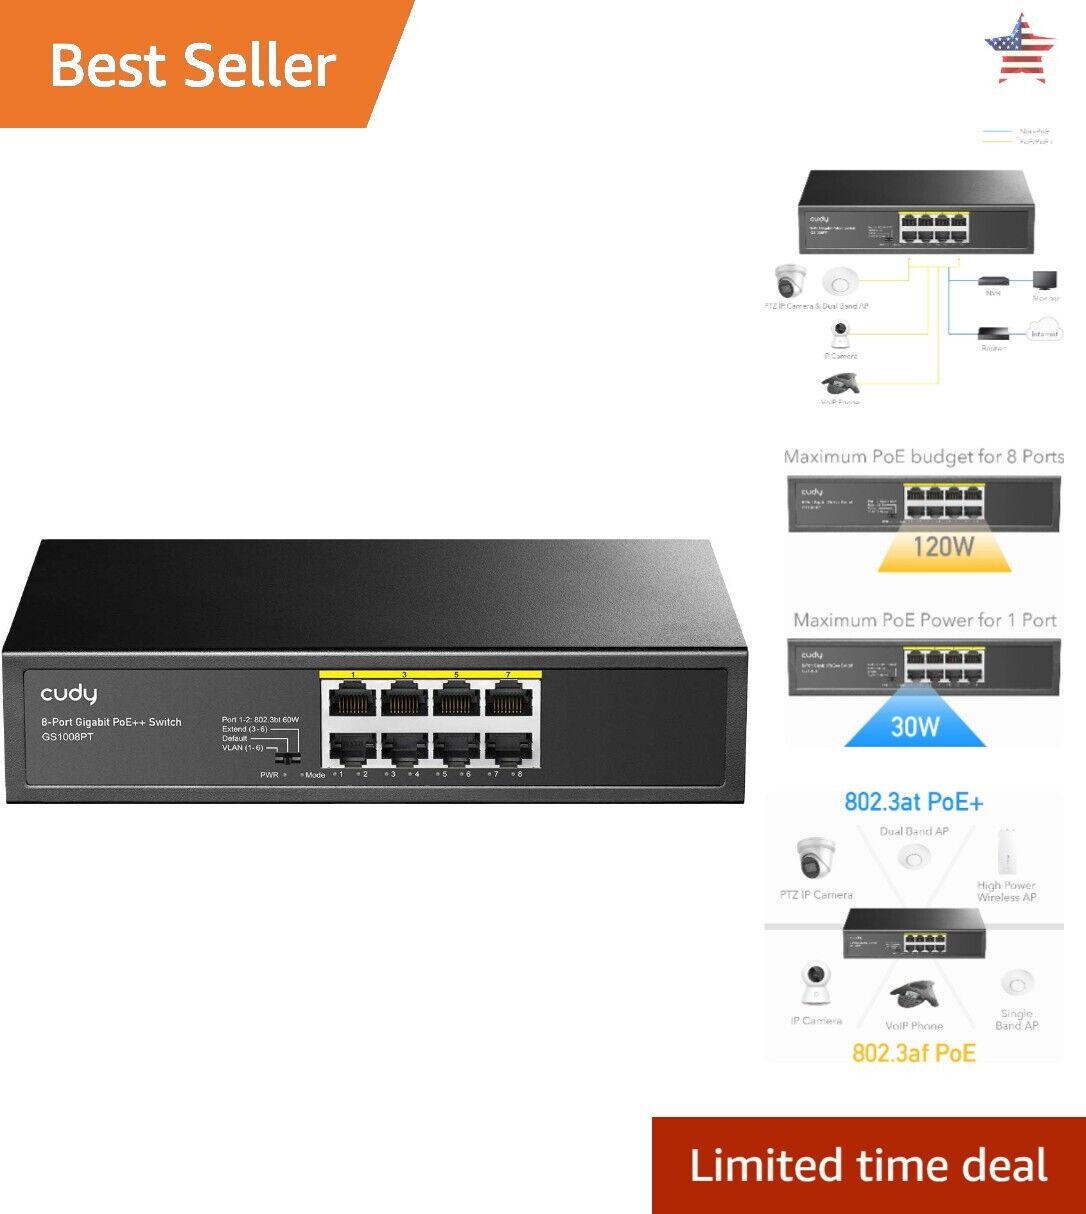 Gigabit PoE+ Switch - 8 Ports, 120W, VLAN, Extend to 250 Meters, Plug and Play